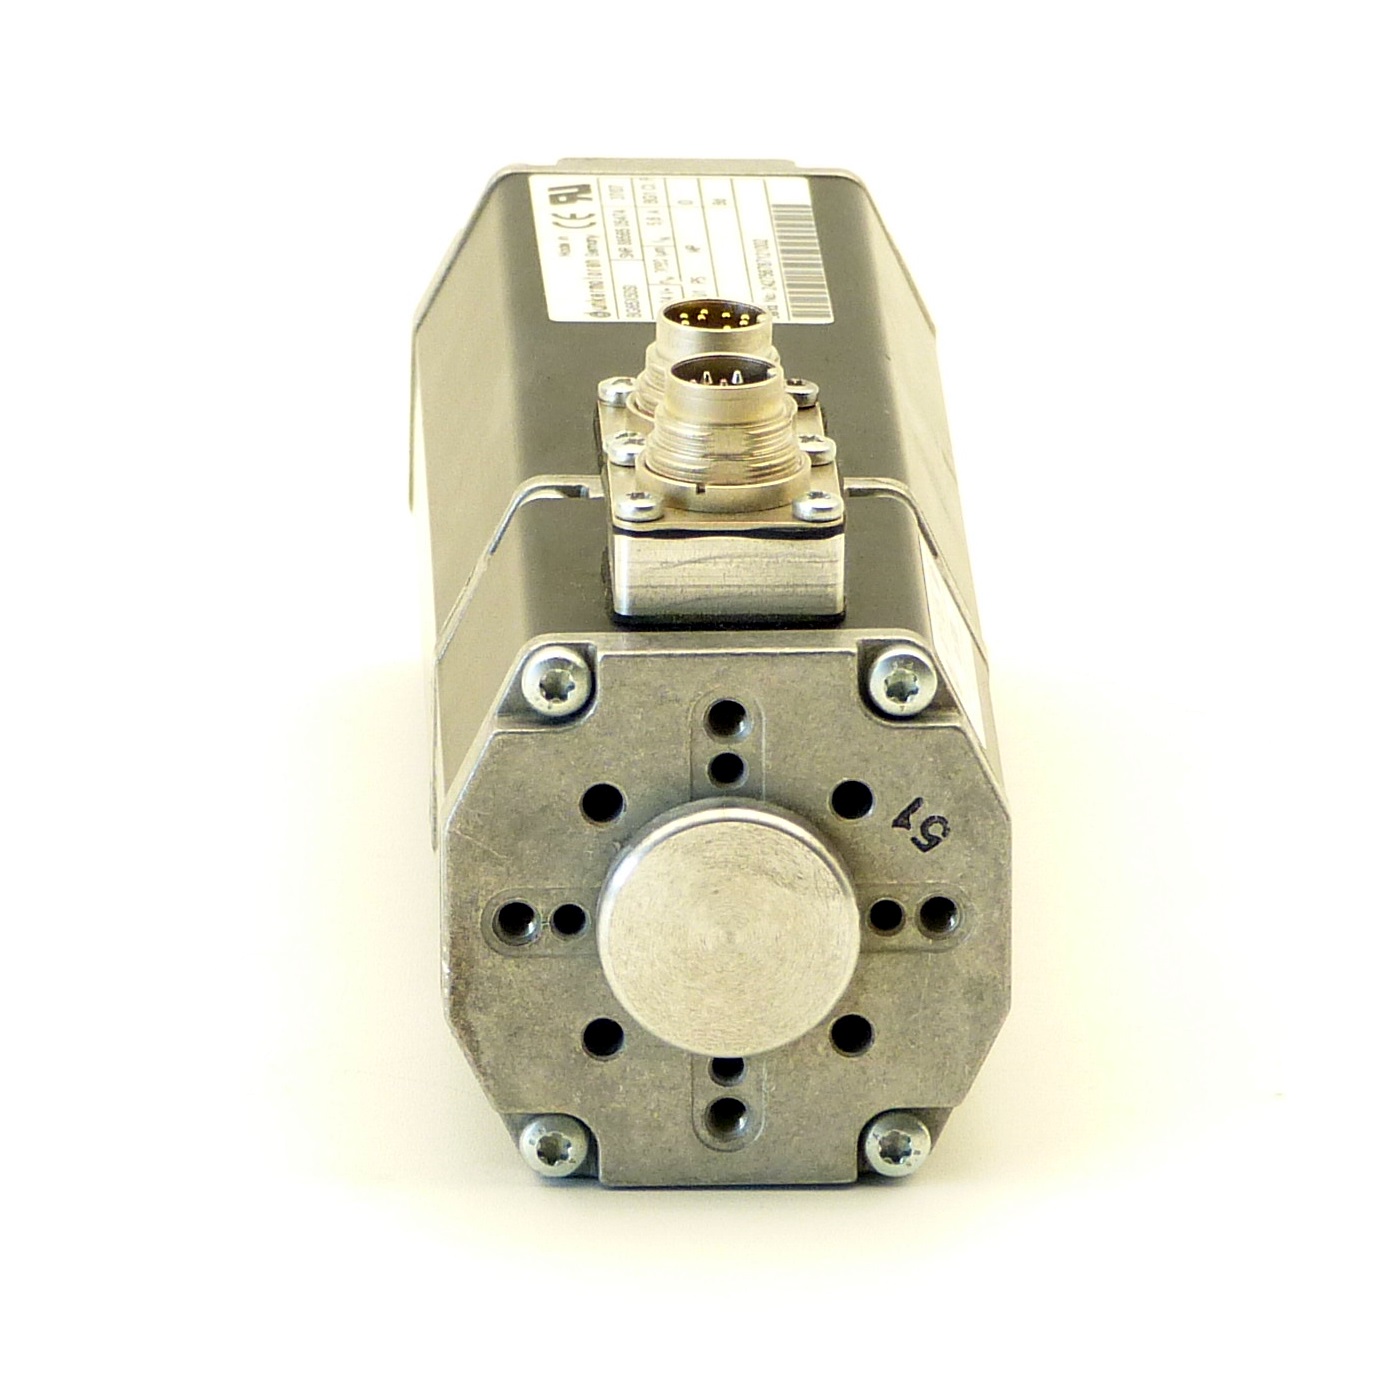 Brushless direct current motor 